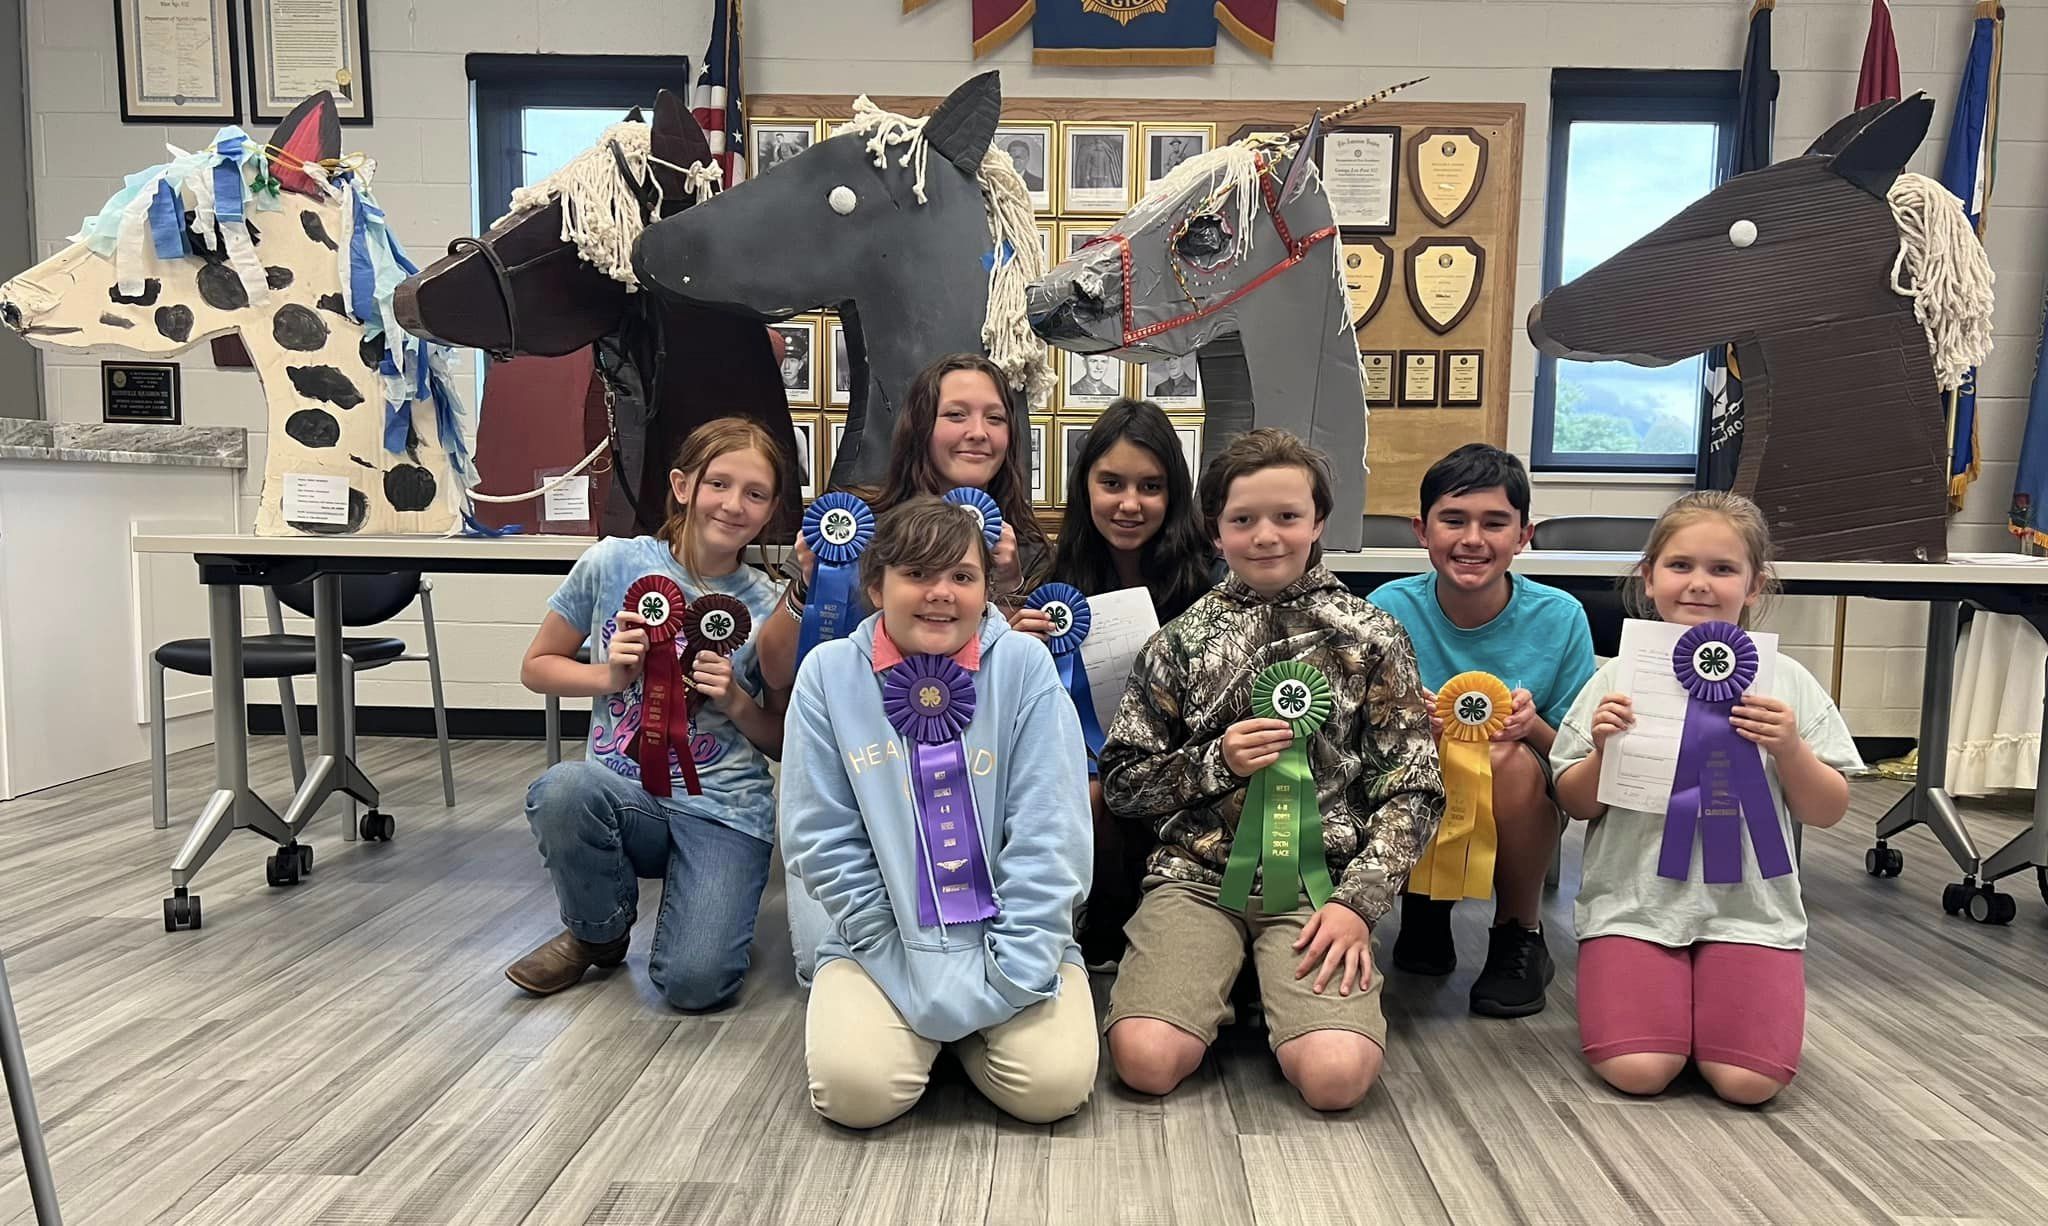 A group of kids pose with ribbons in front of crafted horse heads.